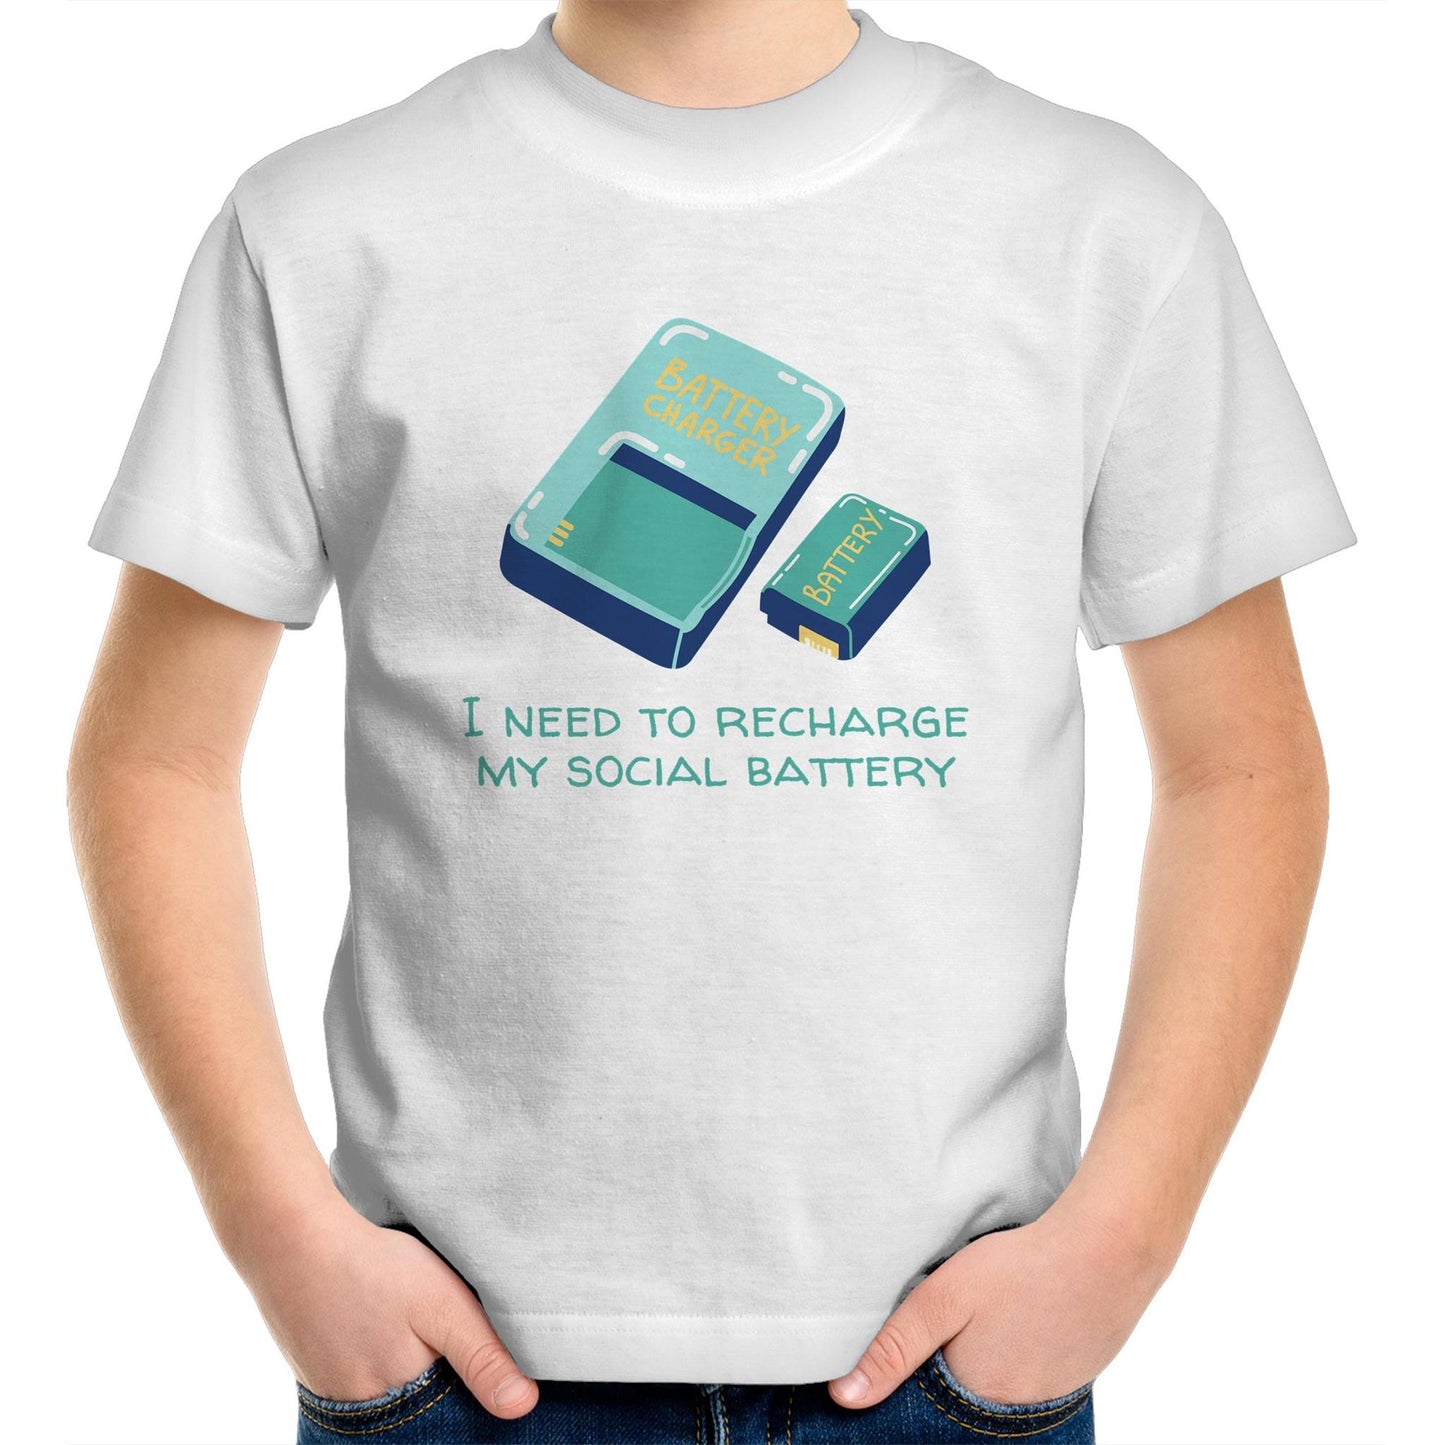 Recharge My Social Battery - Kids Youth Crew T-Shirt White Kids Youth T-shirt Funny